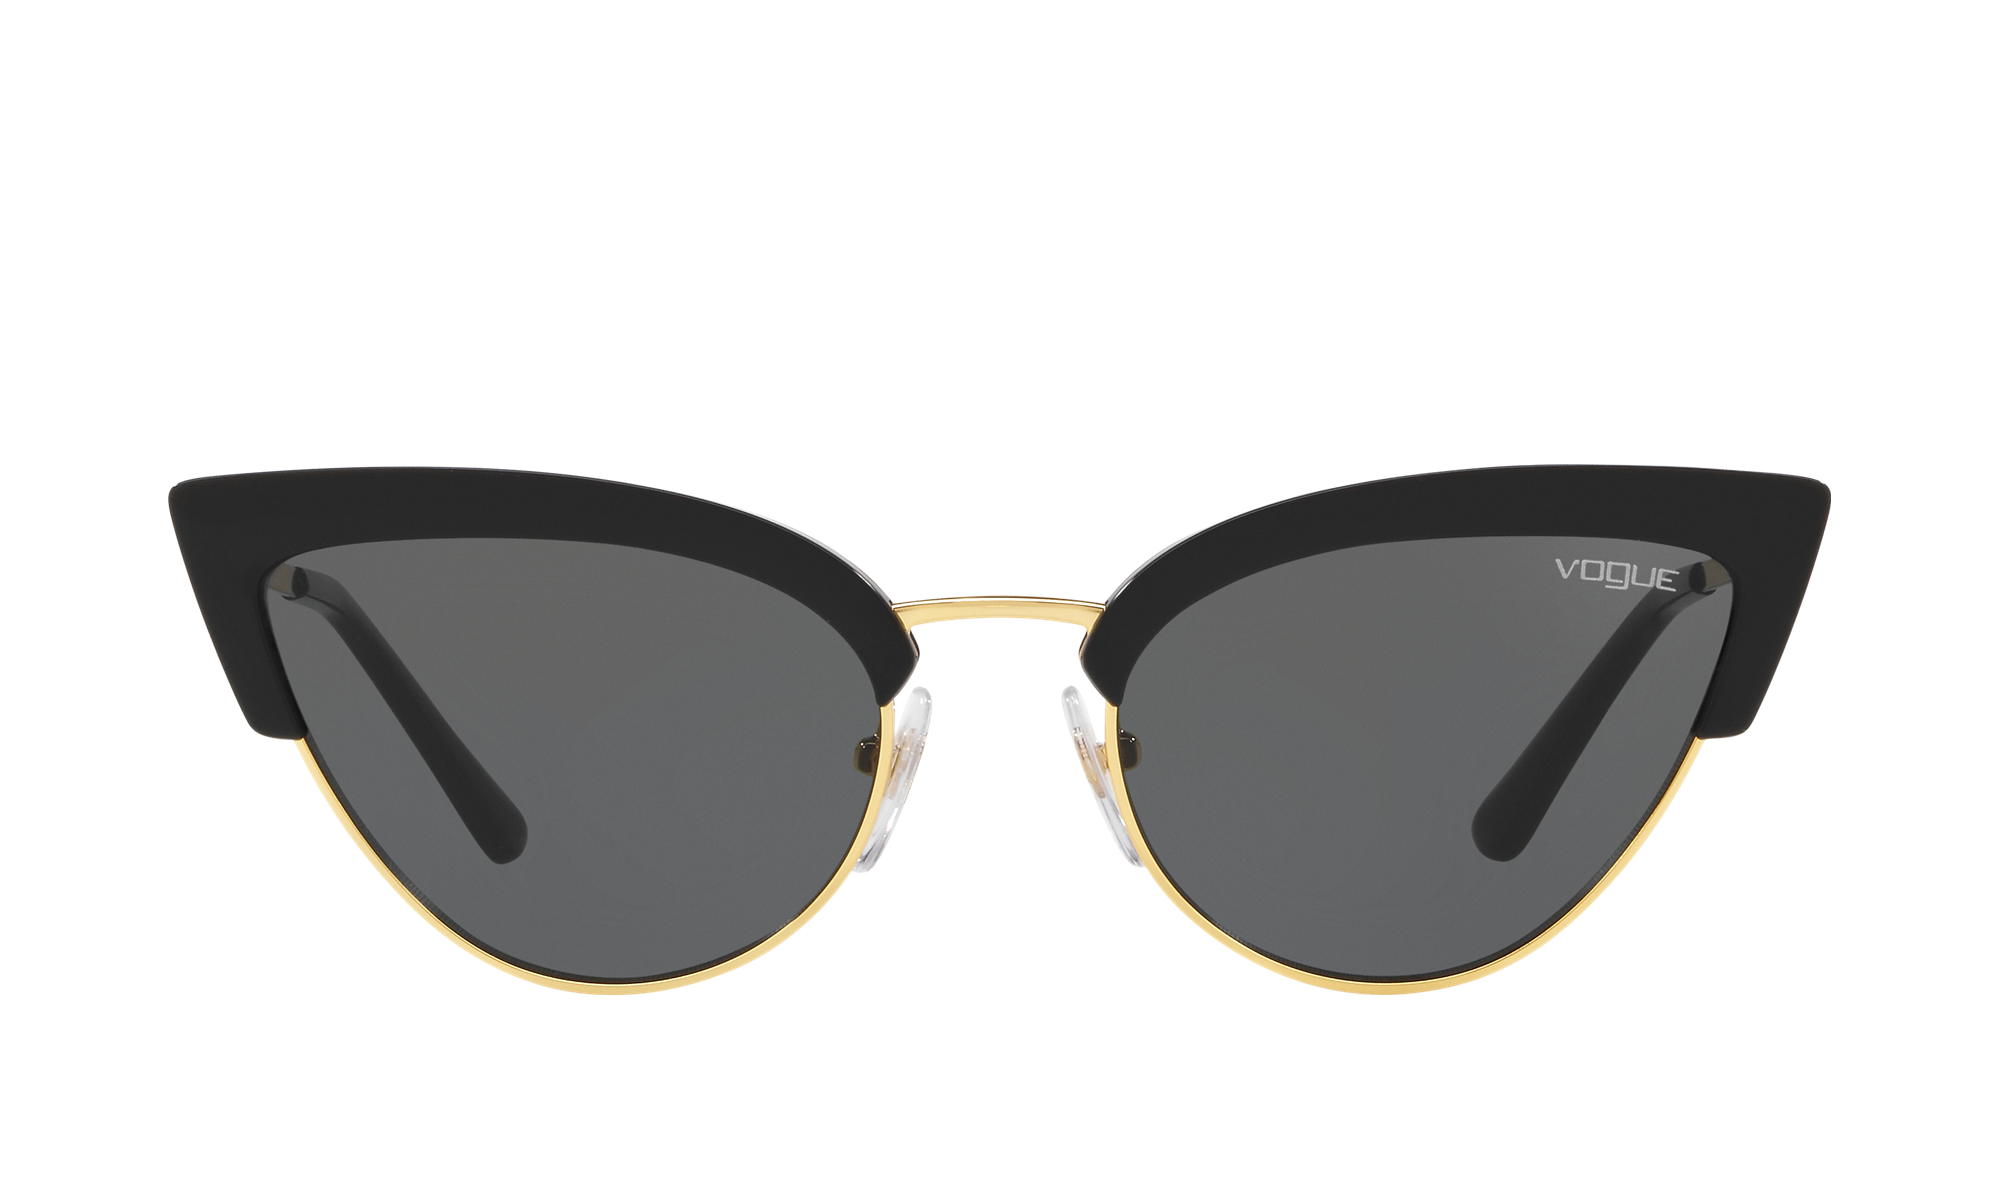 AVIATOR CLASSIC Sunglasses in Gold and Black - RB3025 | Ray-Ban®